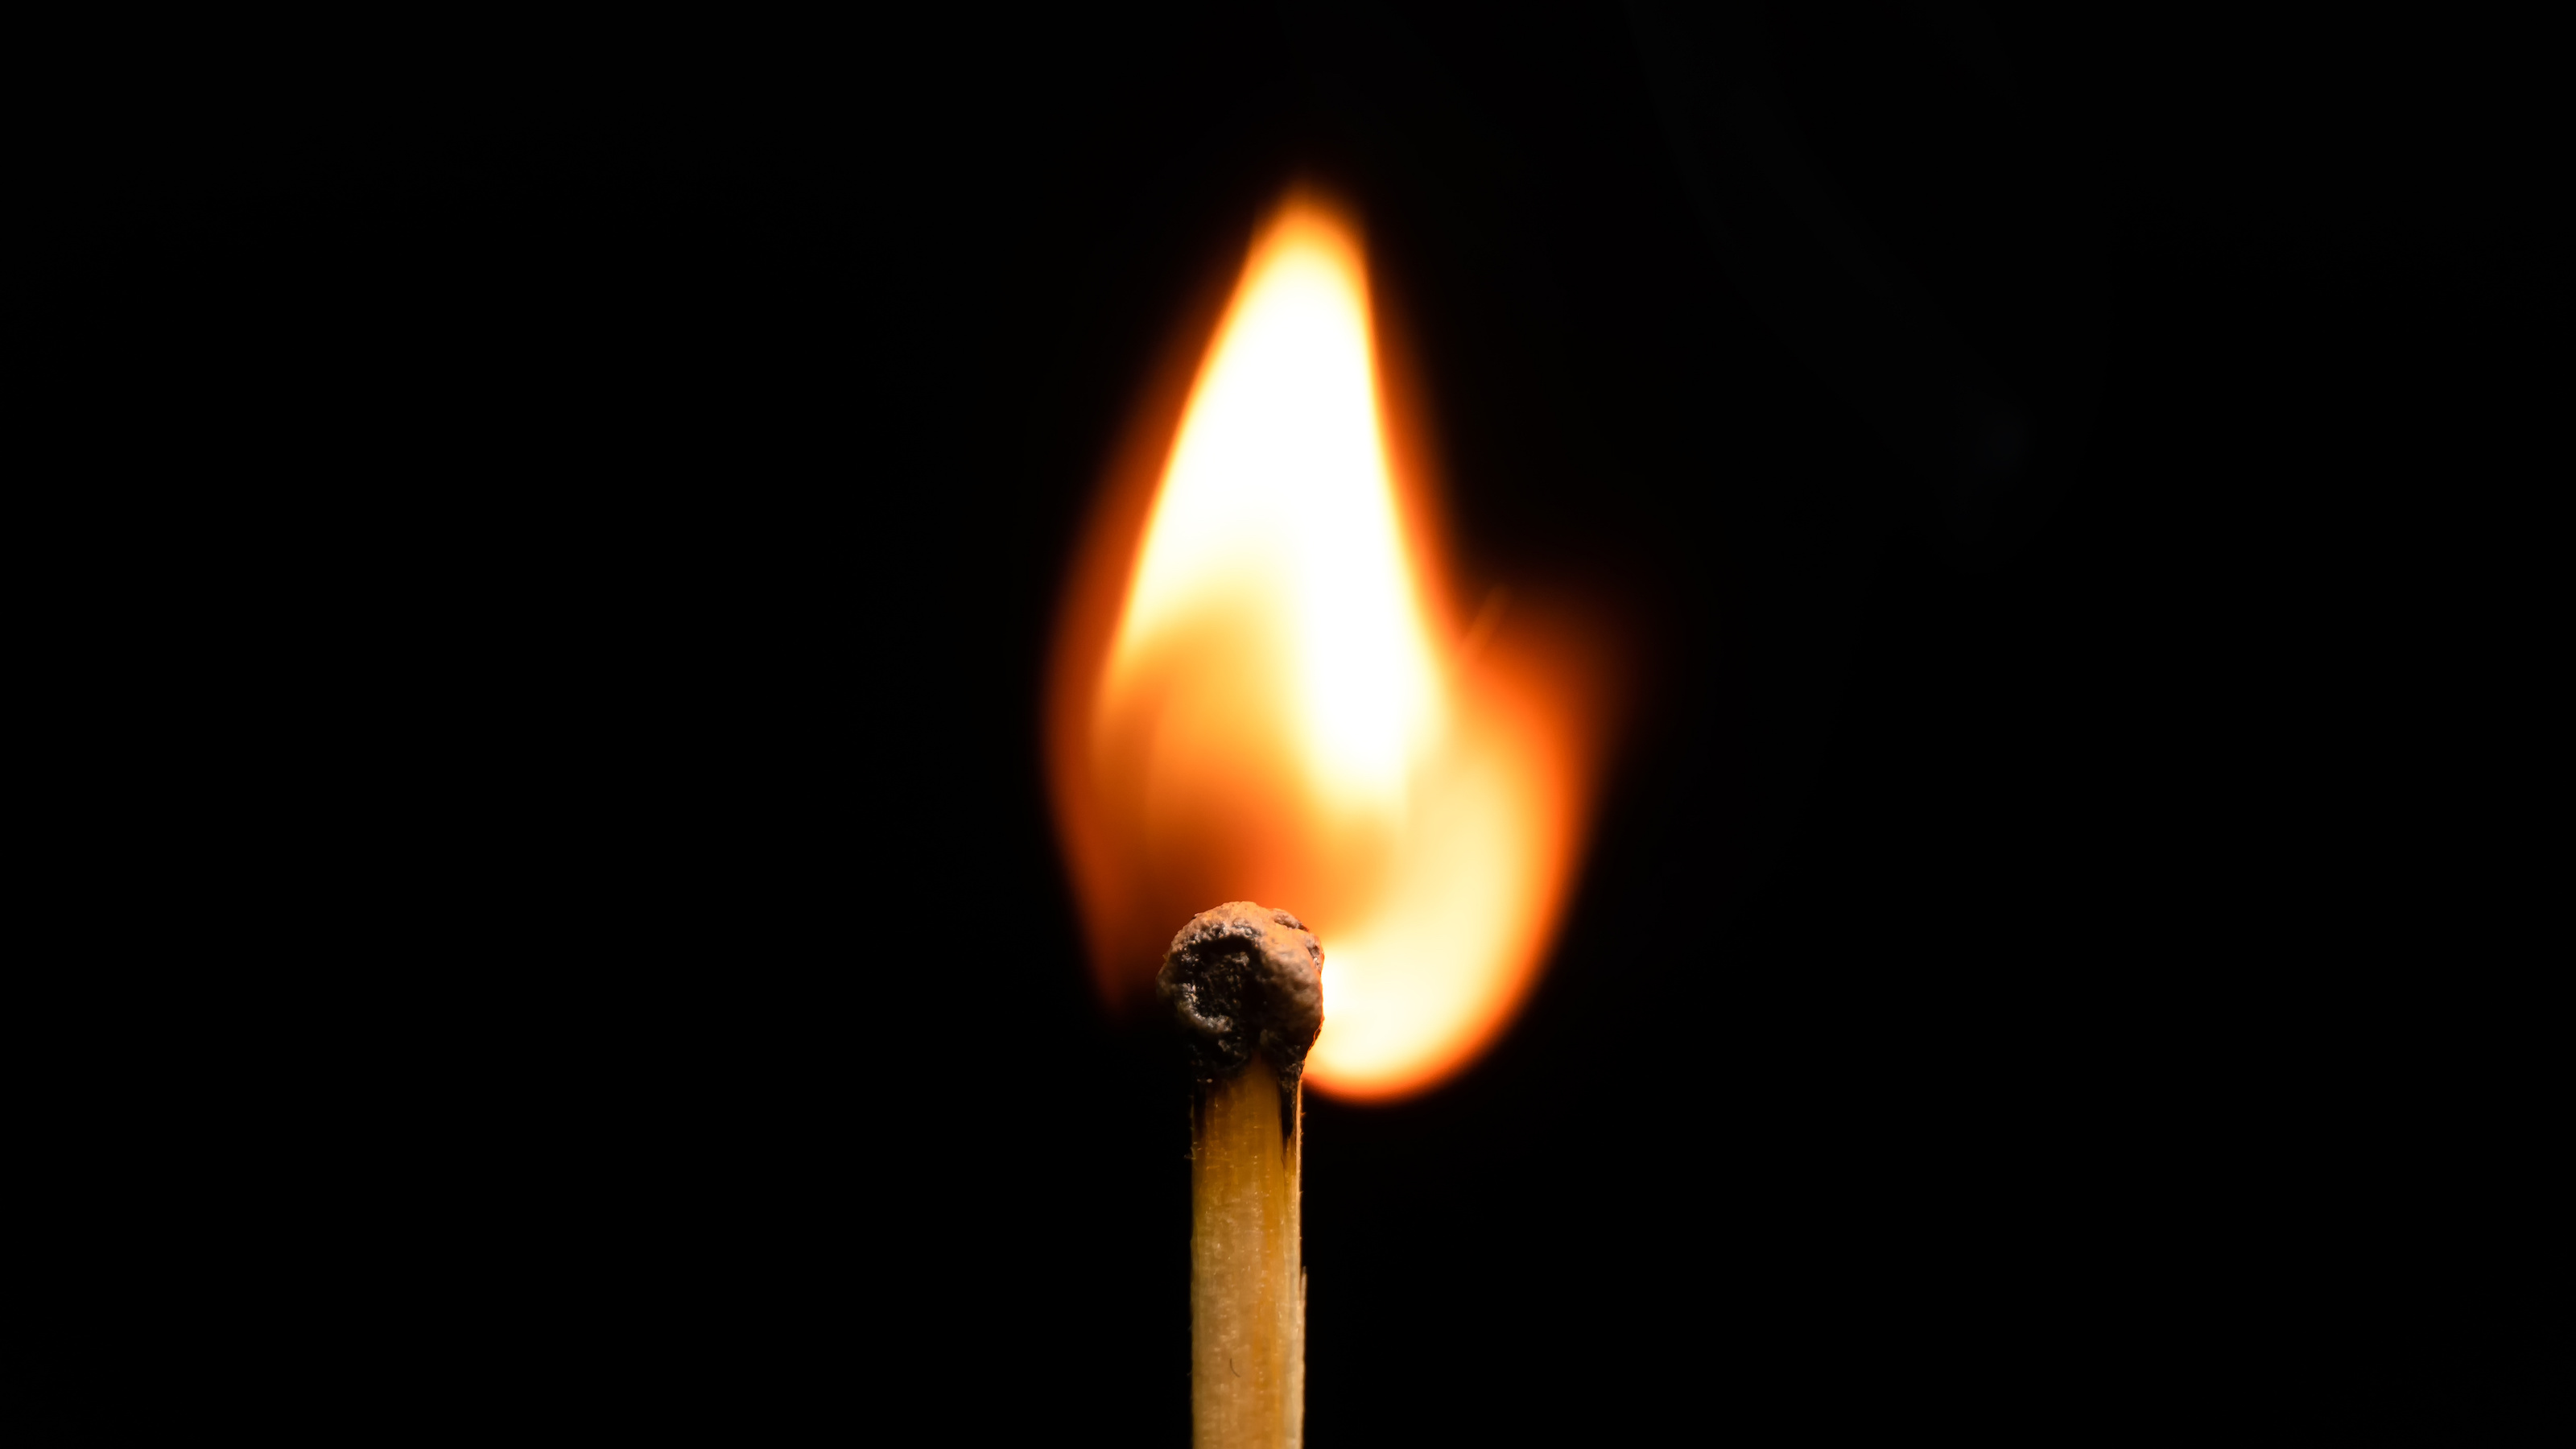 A match stick with a flame on a dark background.